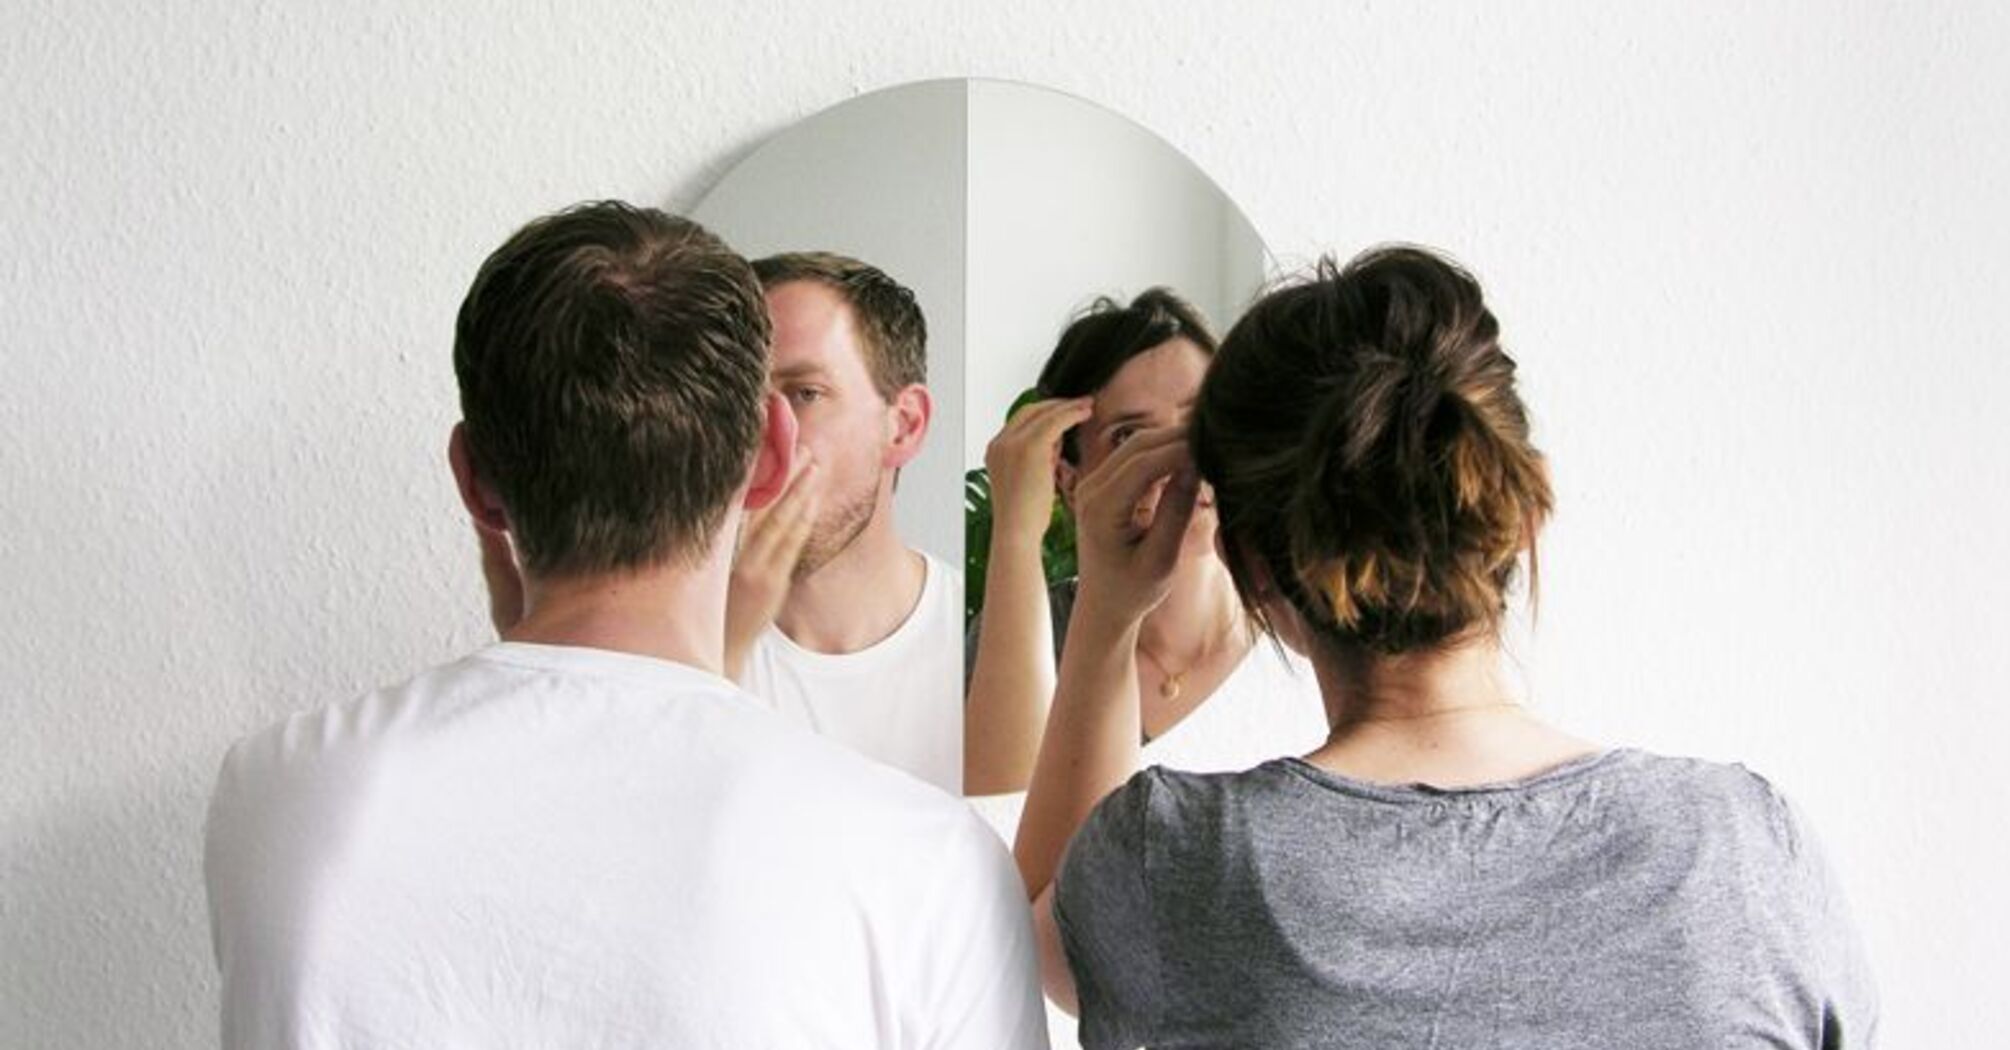 Why it is not recommended to look in the mirror together